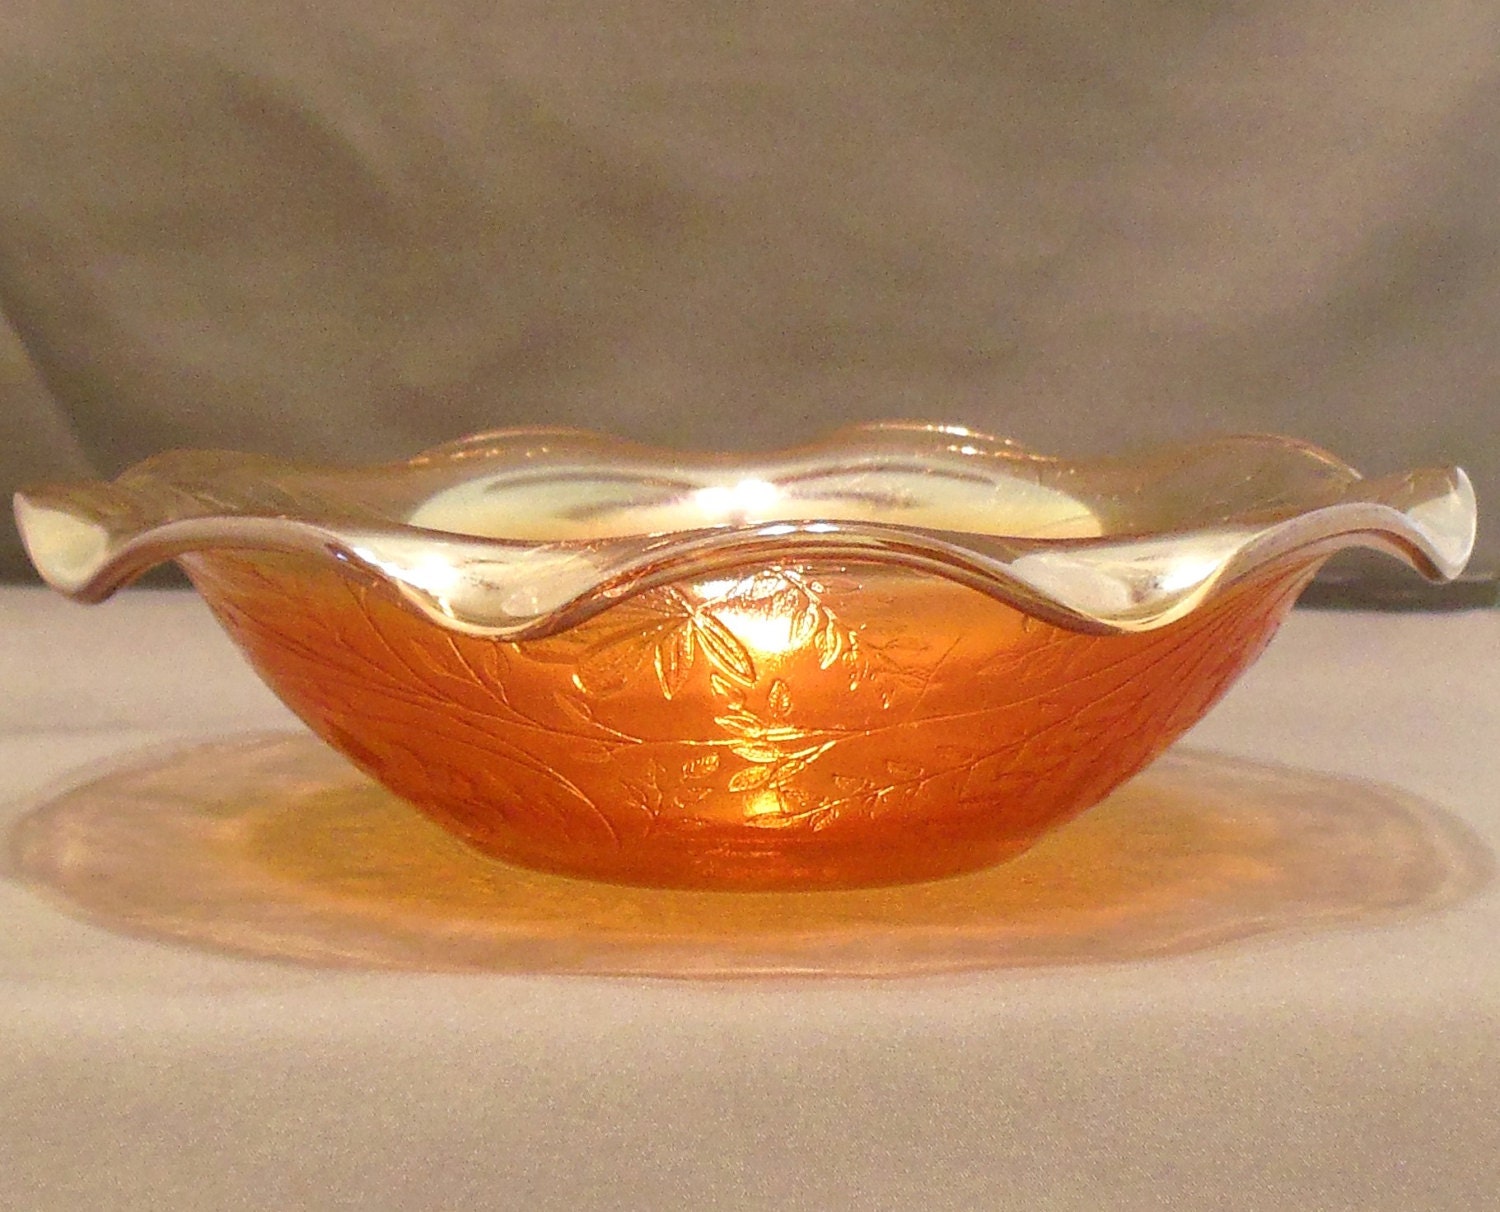 Vintage Floragold Louisa Ruffled Bowl Iridescent Jeanette Glass 91 2″ Depression 50’s Item 2